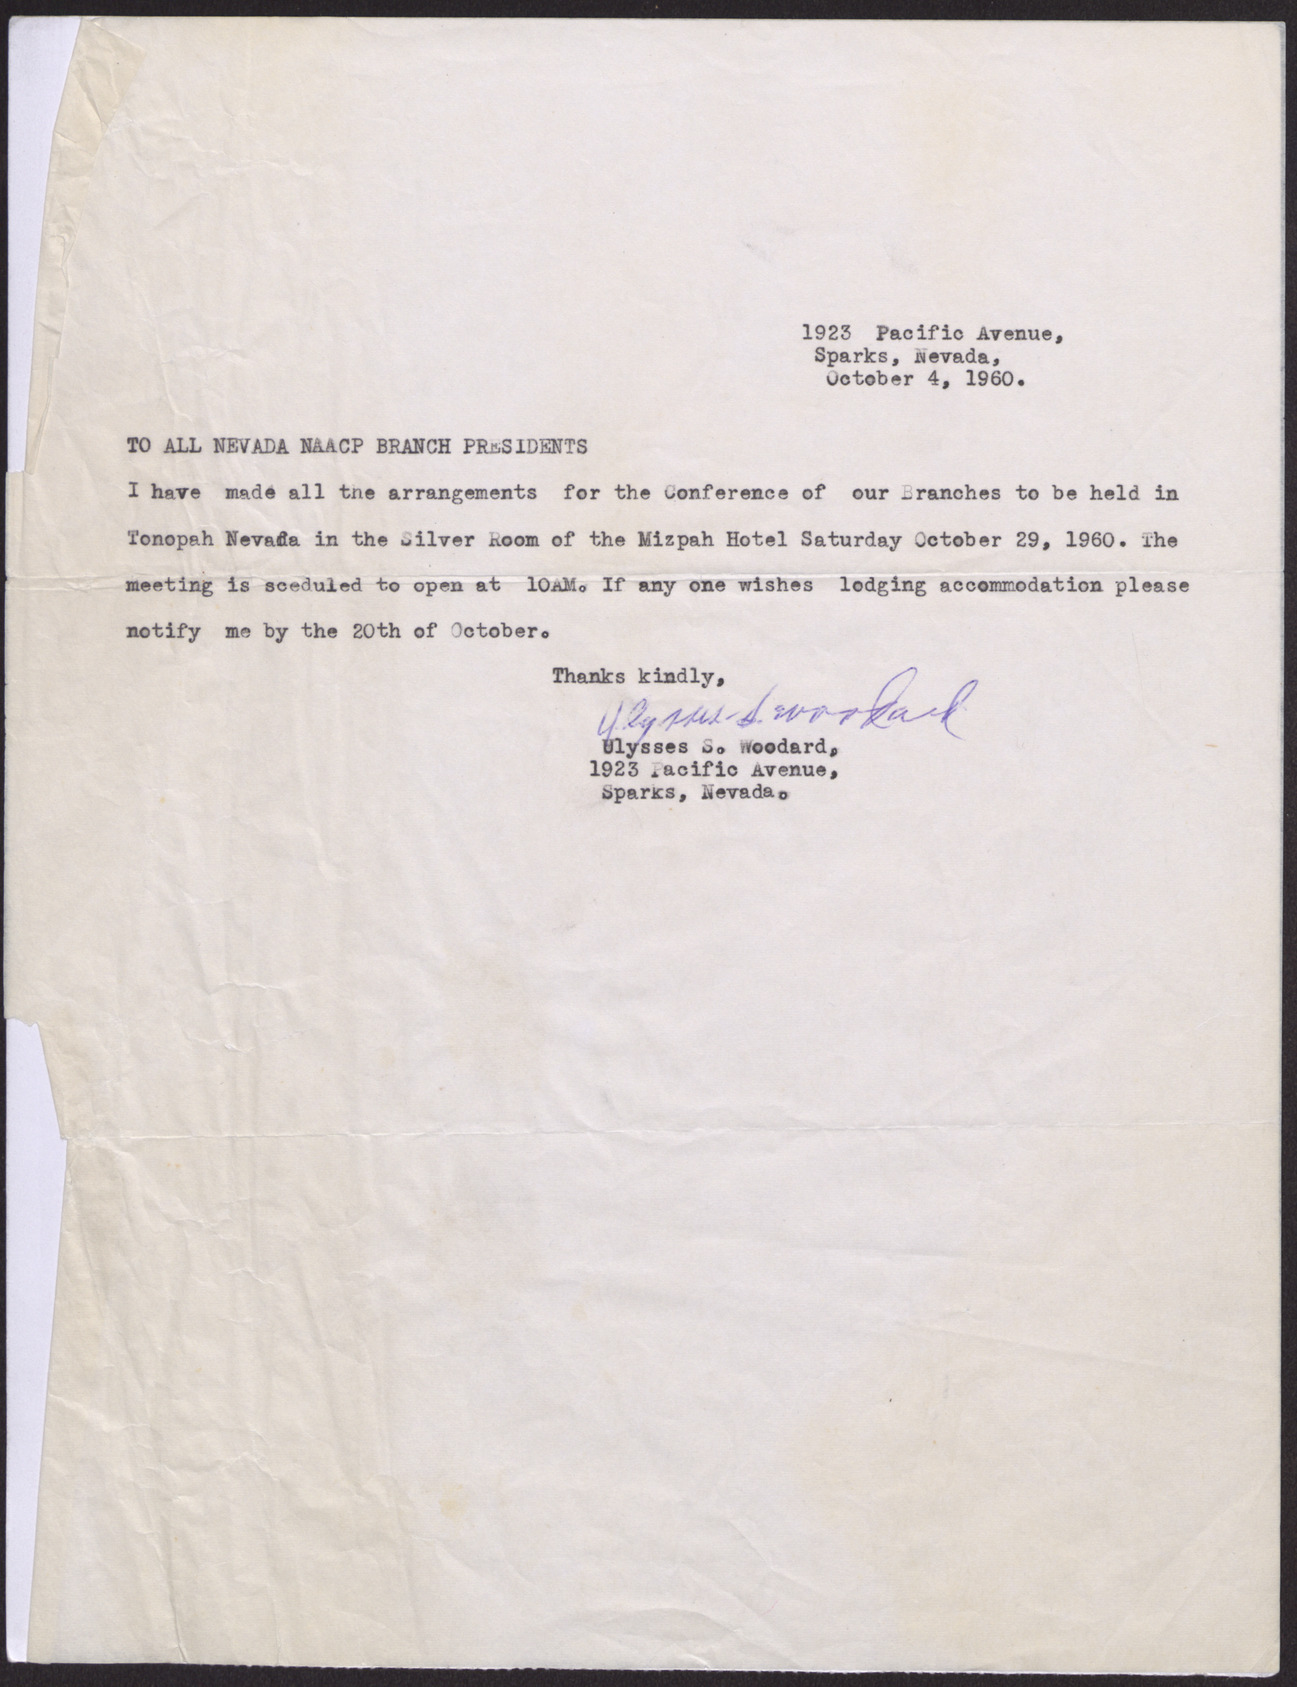 Letter to Nevada NAACP Branch Presidents from Ulysses S. Woodard, October 4, 1960